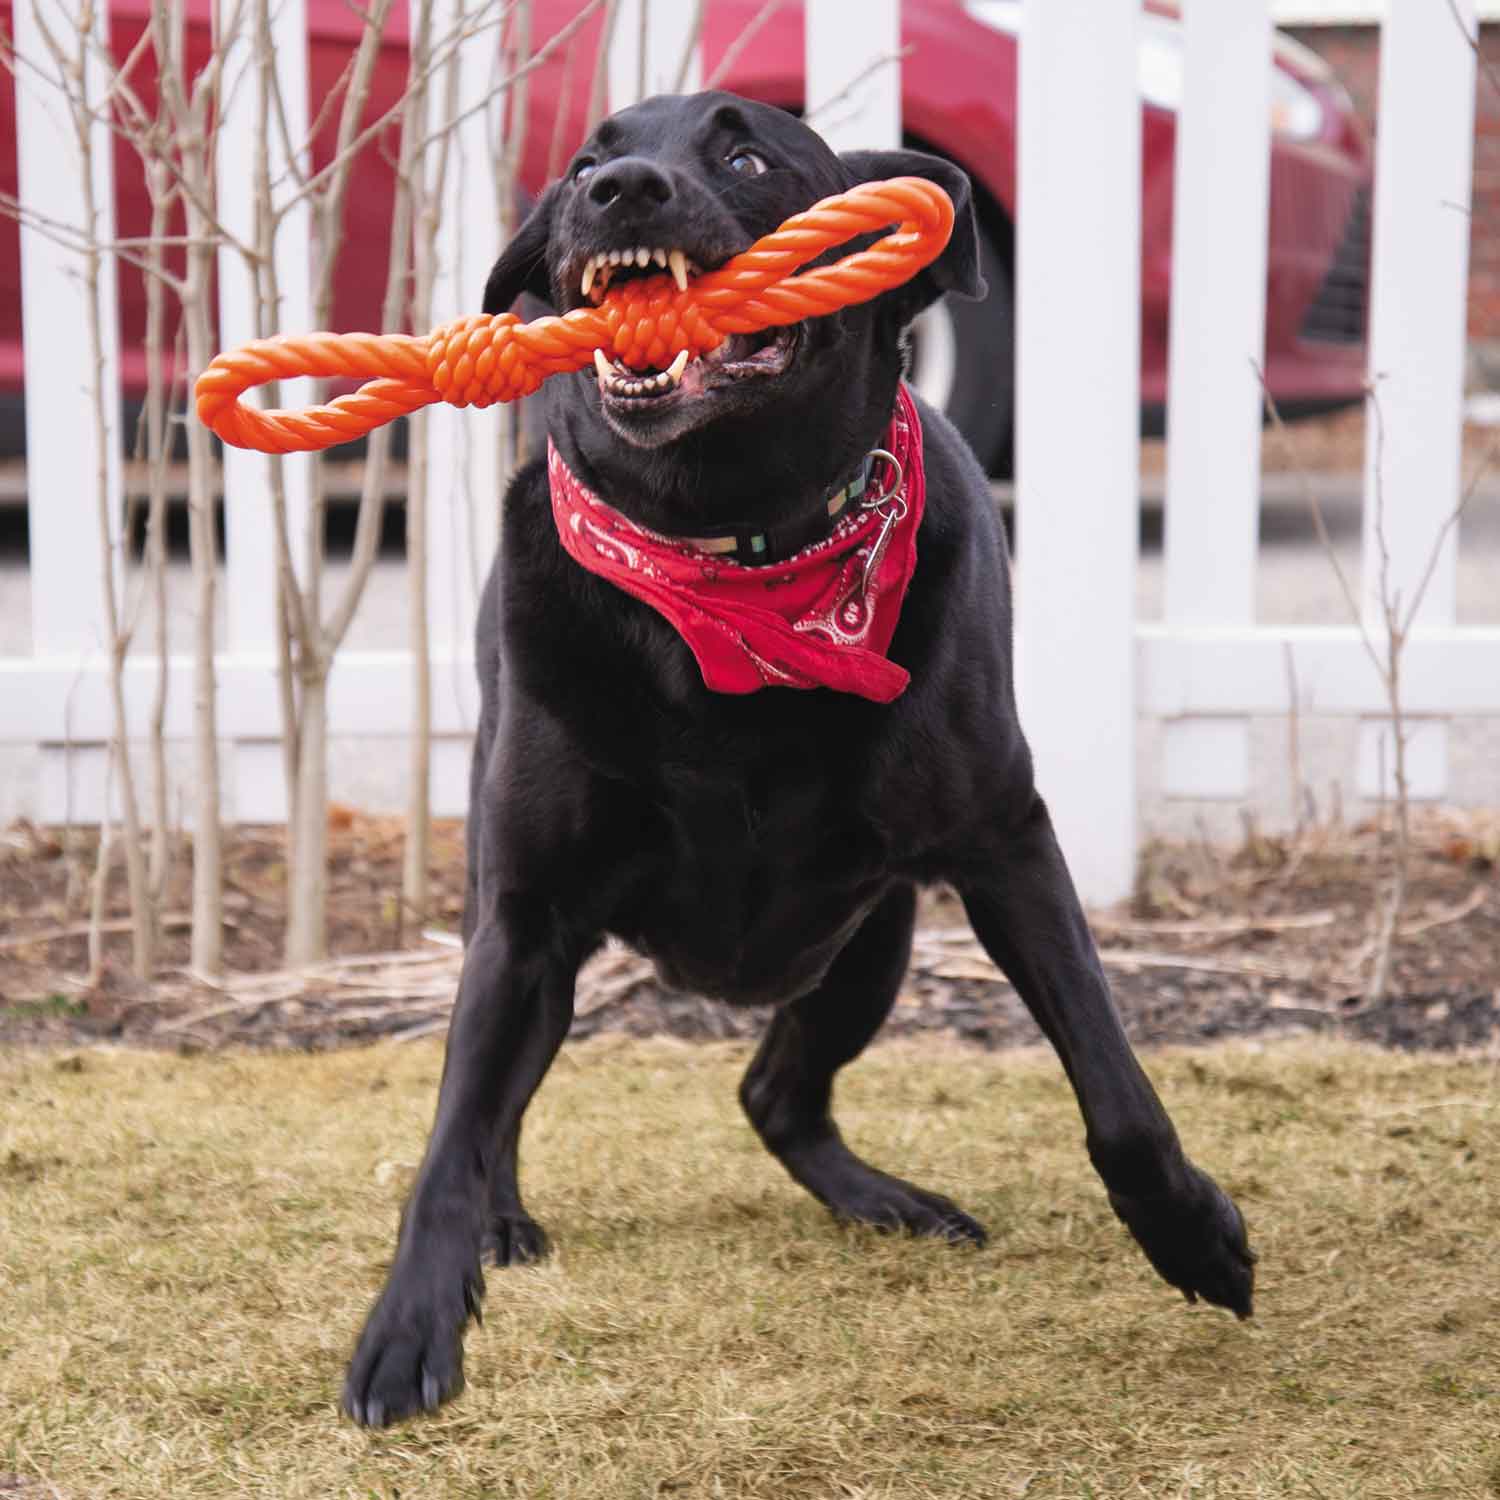 Infinity Pet Flexible TPR Rope Chew and Tug Toy, Double Knot, Orange - image 2 of 5